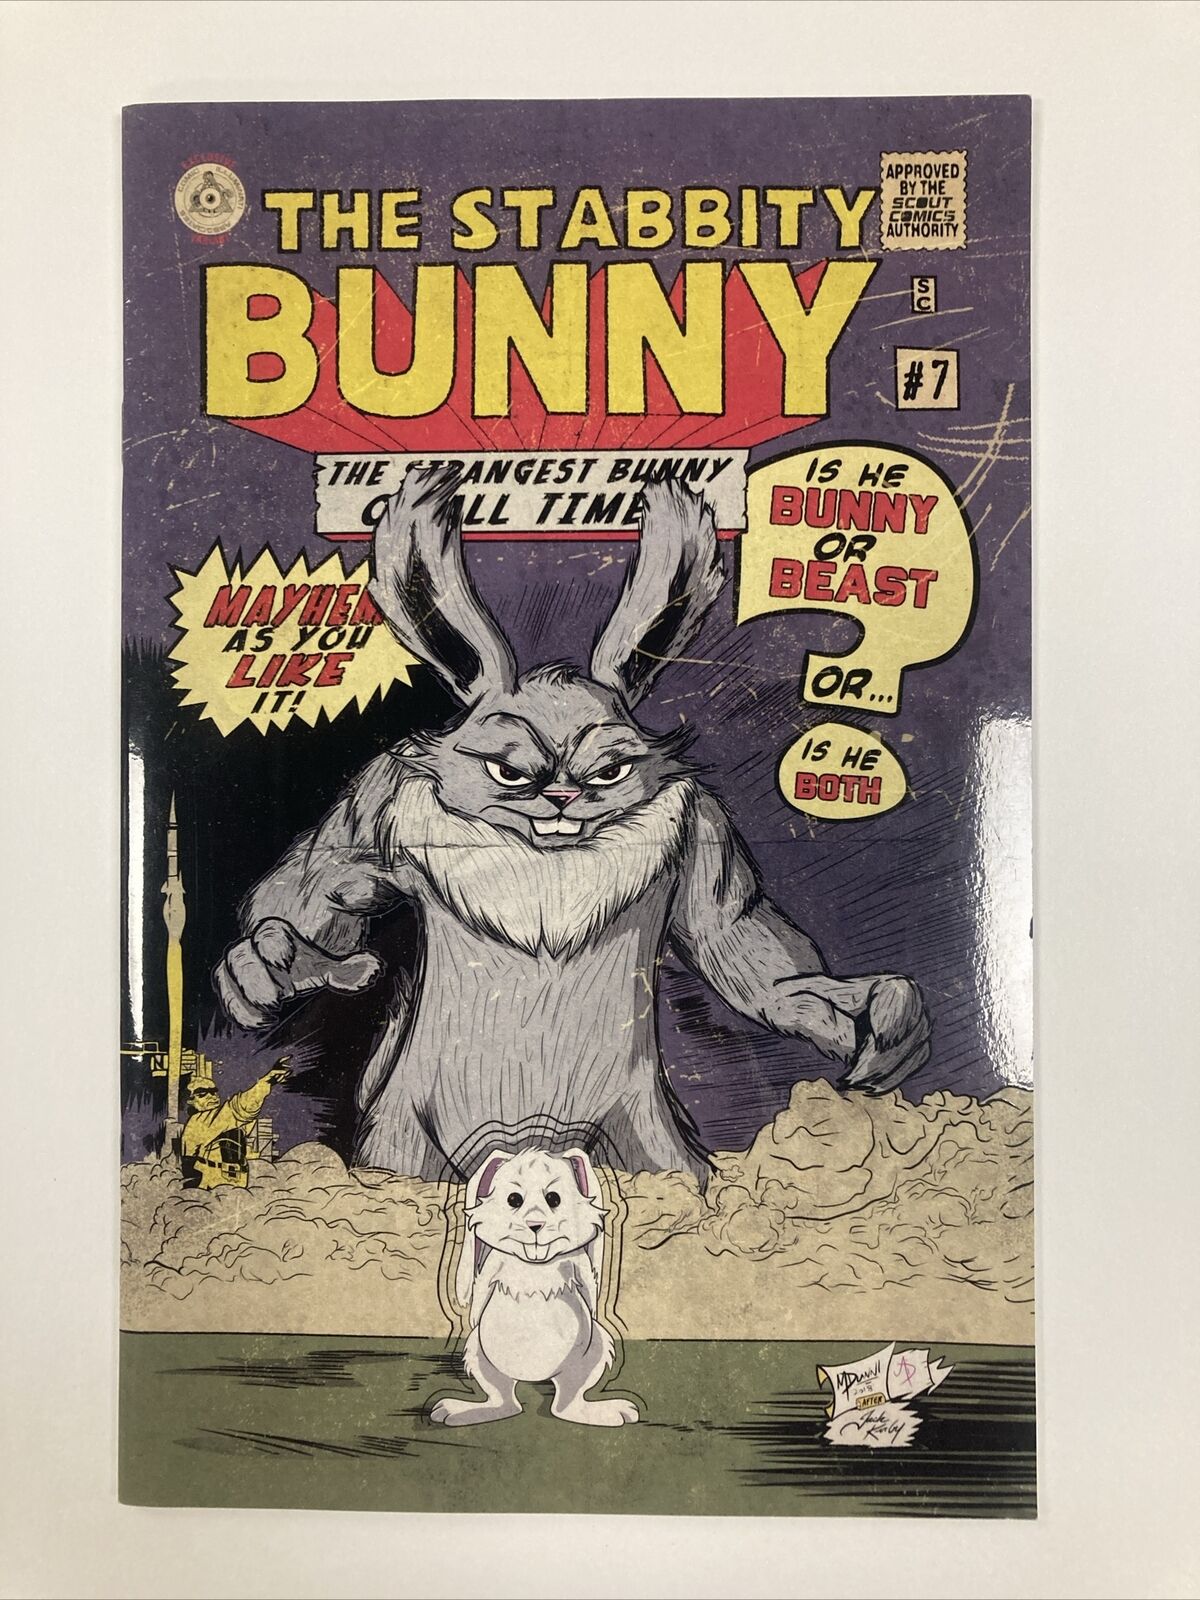 STABBITY BUNNY #7 SCOUT COMICS Hulk Homage Cover